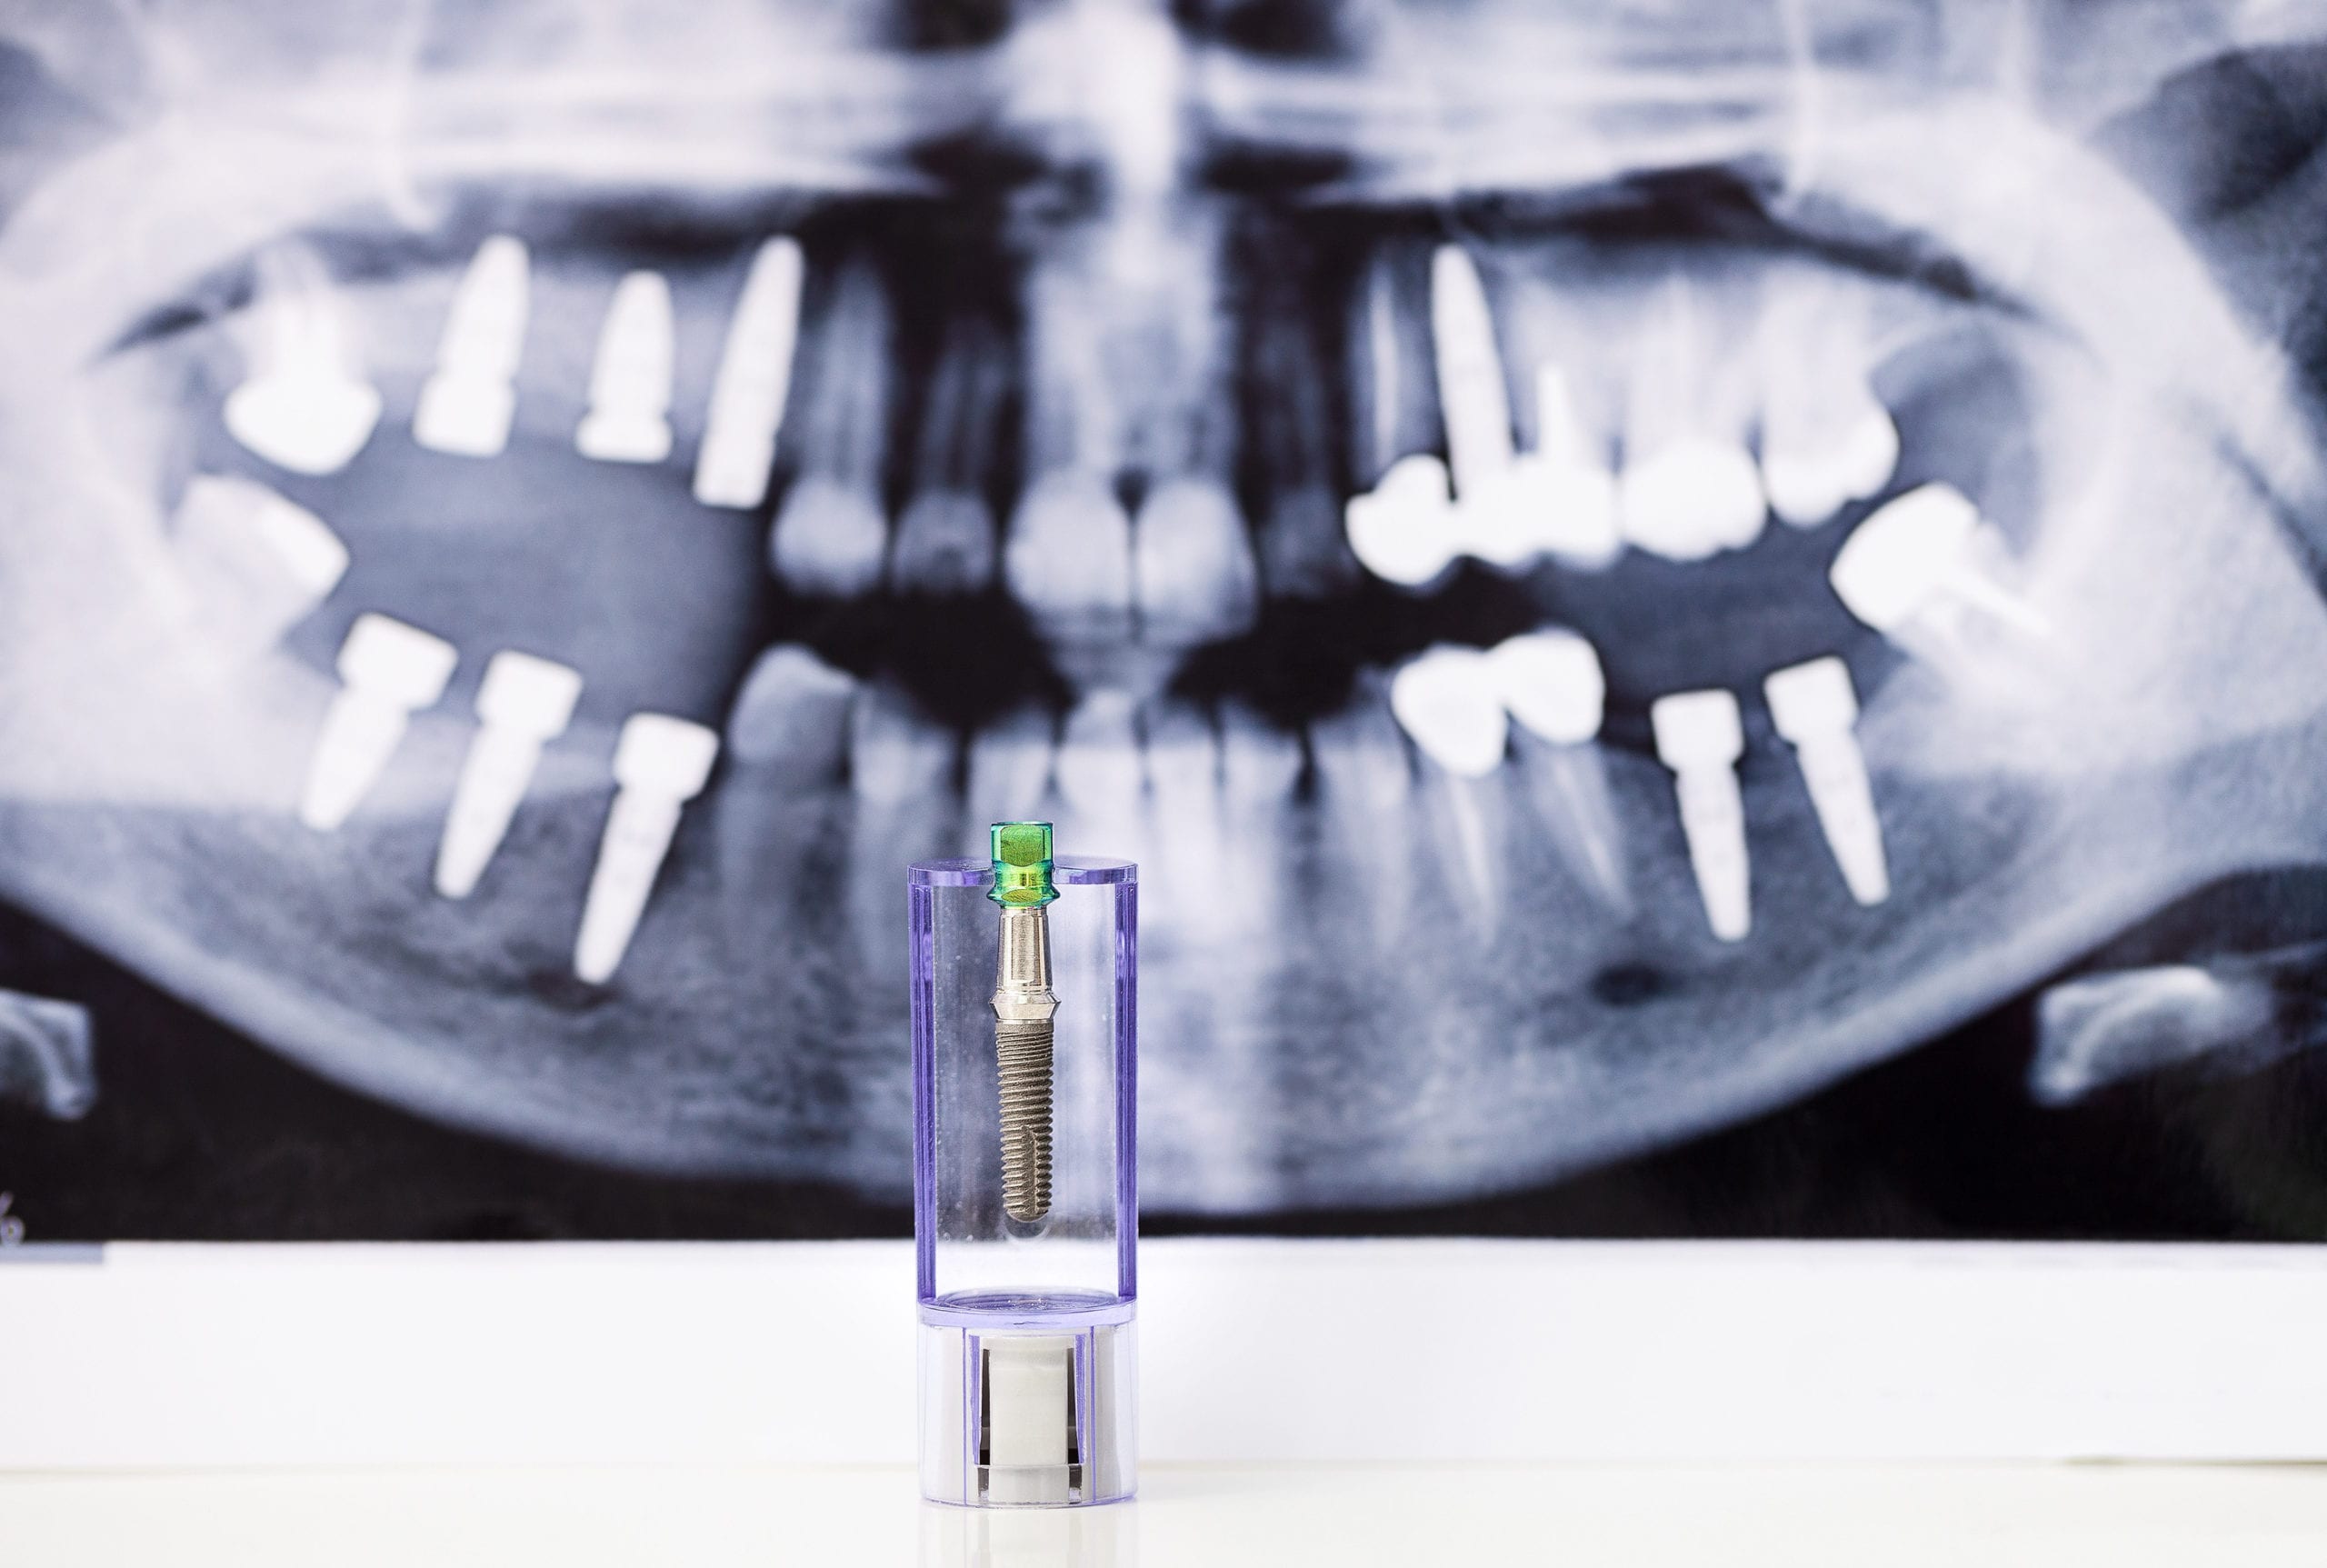 cost of dental implants in Houston